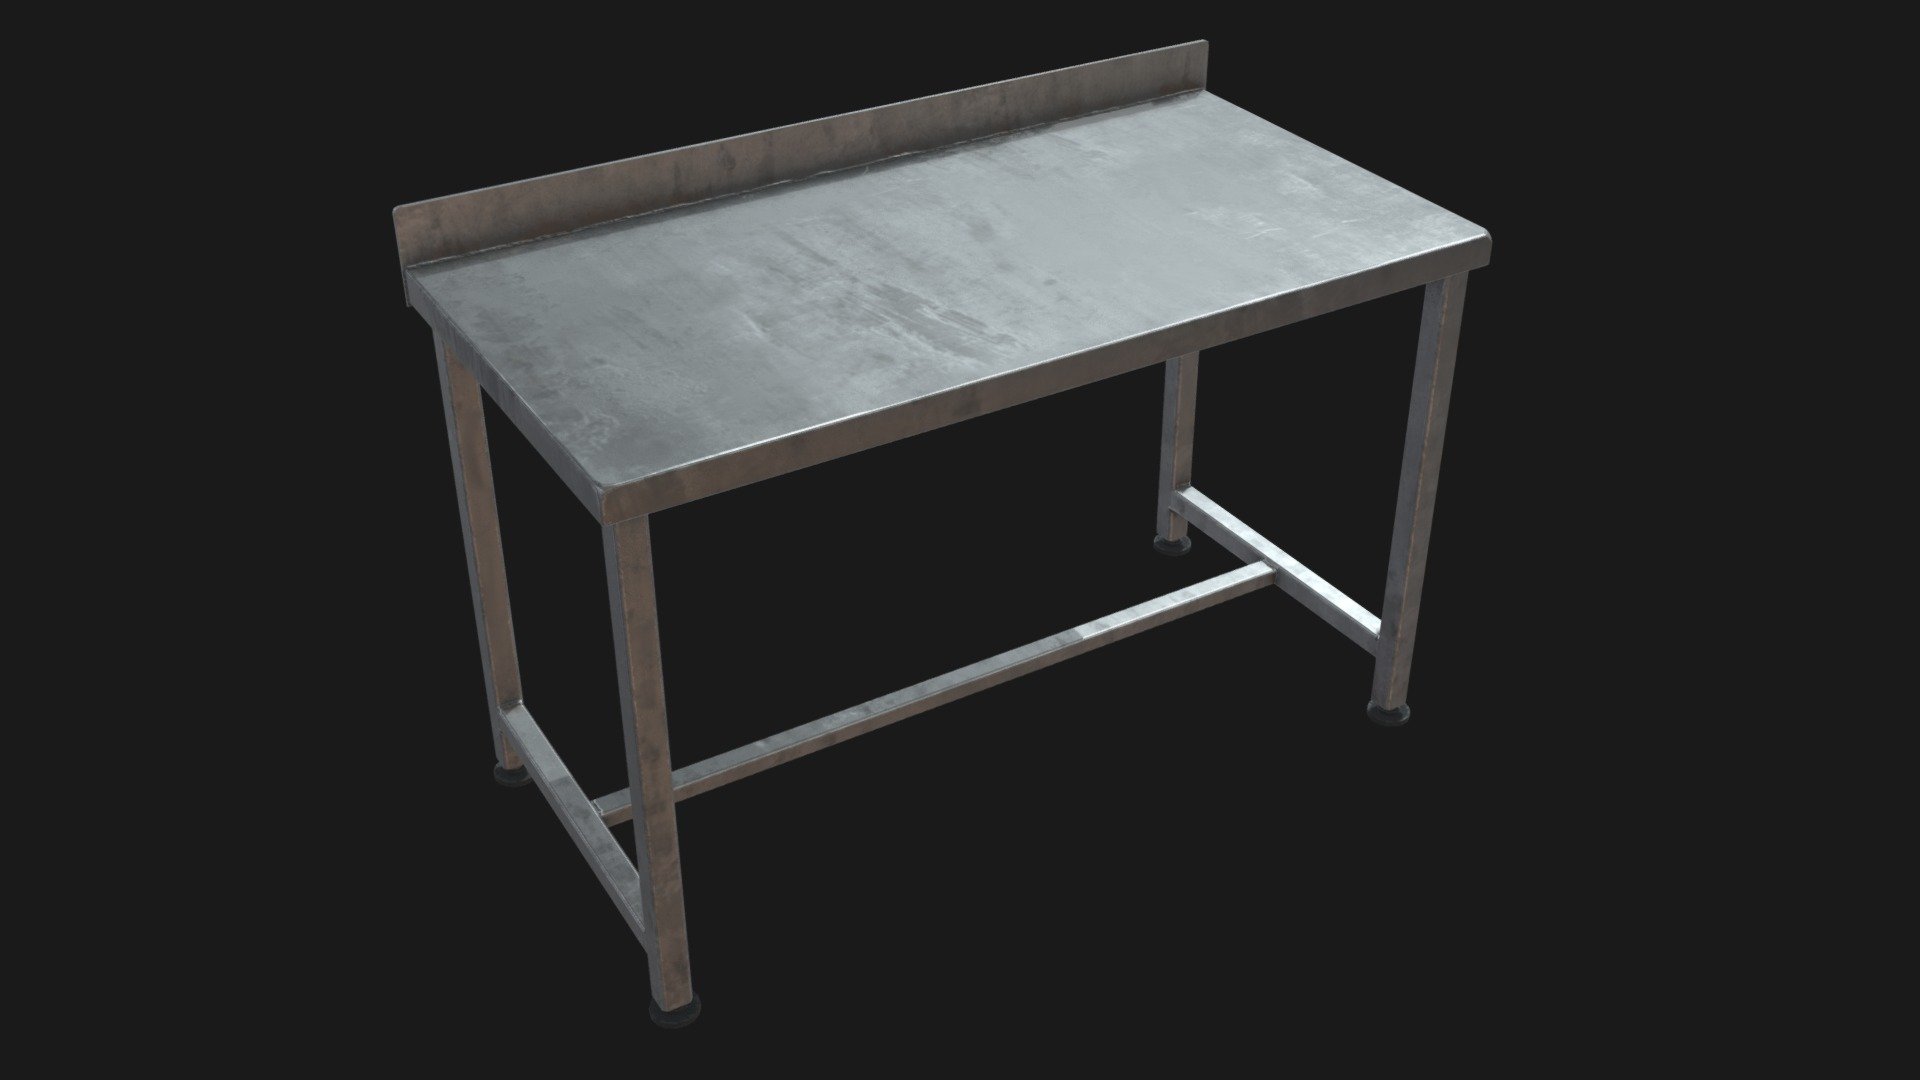 Low poly welded industrial stainless steel table. 
Perfect for interiors of industrial scenes, laboratories, workshops, kitchens, morgues, etc

Key Features:


Ready for Game Engines and Real-time Rendering
High-quality PBR-textures (Unity + Unreal Engine + MetalRoughness + SpecGlossines texture sets)
Model is built to real-world scale (metric system)
Efficient use of the UV space
Optimized topology 
All materials and objects named appropriately
Tested in Marmoset Toolbag 3, UE4 and Unity
No special plugins needed
Have OpenGL and DirextX normal map
The unreal engine version of the mesh has built-in collisions

Texture maps:


Unity: Albedo, Normal, MetalRougness, AO
Unreal Engine: BaseColor, Normal, OcclusionRoughnessMetallic
PBR_MetalRough: Albedo, Height, Metal, Rougness, Normal
PBR_SpecGloss: Diffuse, Glossines, Height, Specular, Normal

Texture resolution: 2048×2048 px

Formats: .fbx, .obj, .blend - Stainless steel table - 3D model by gromafon 3d model